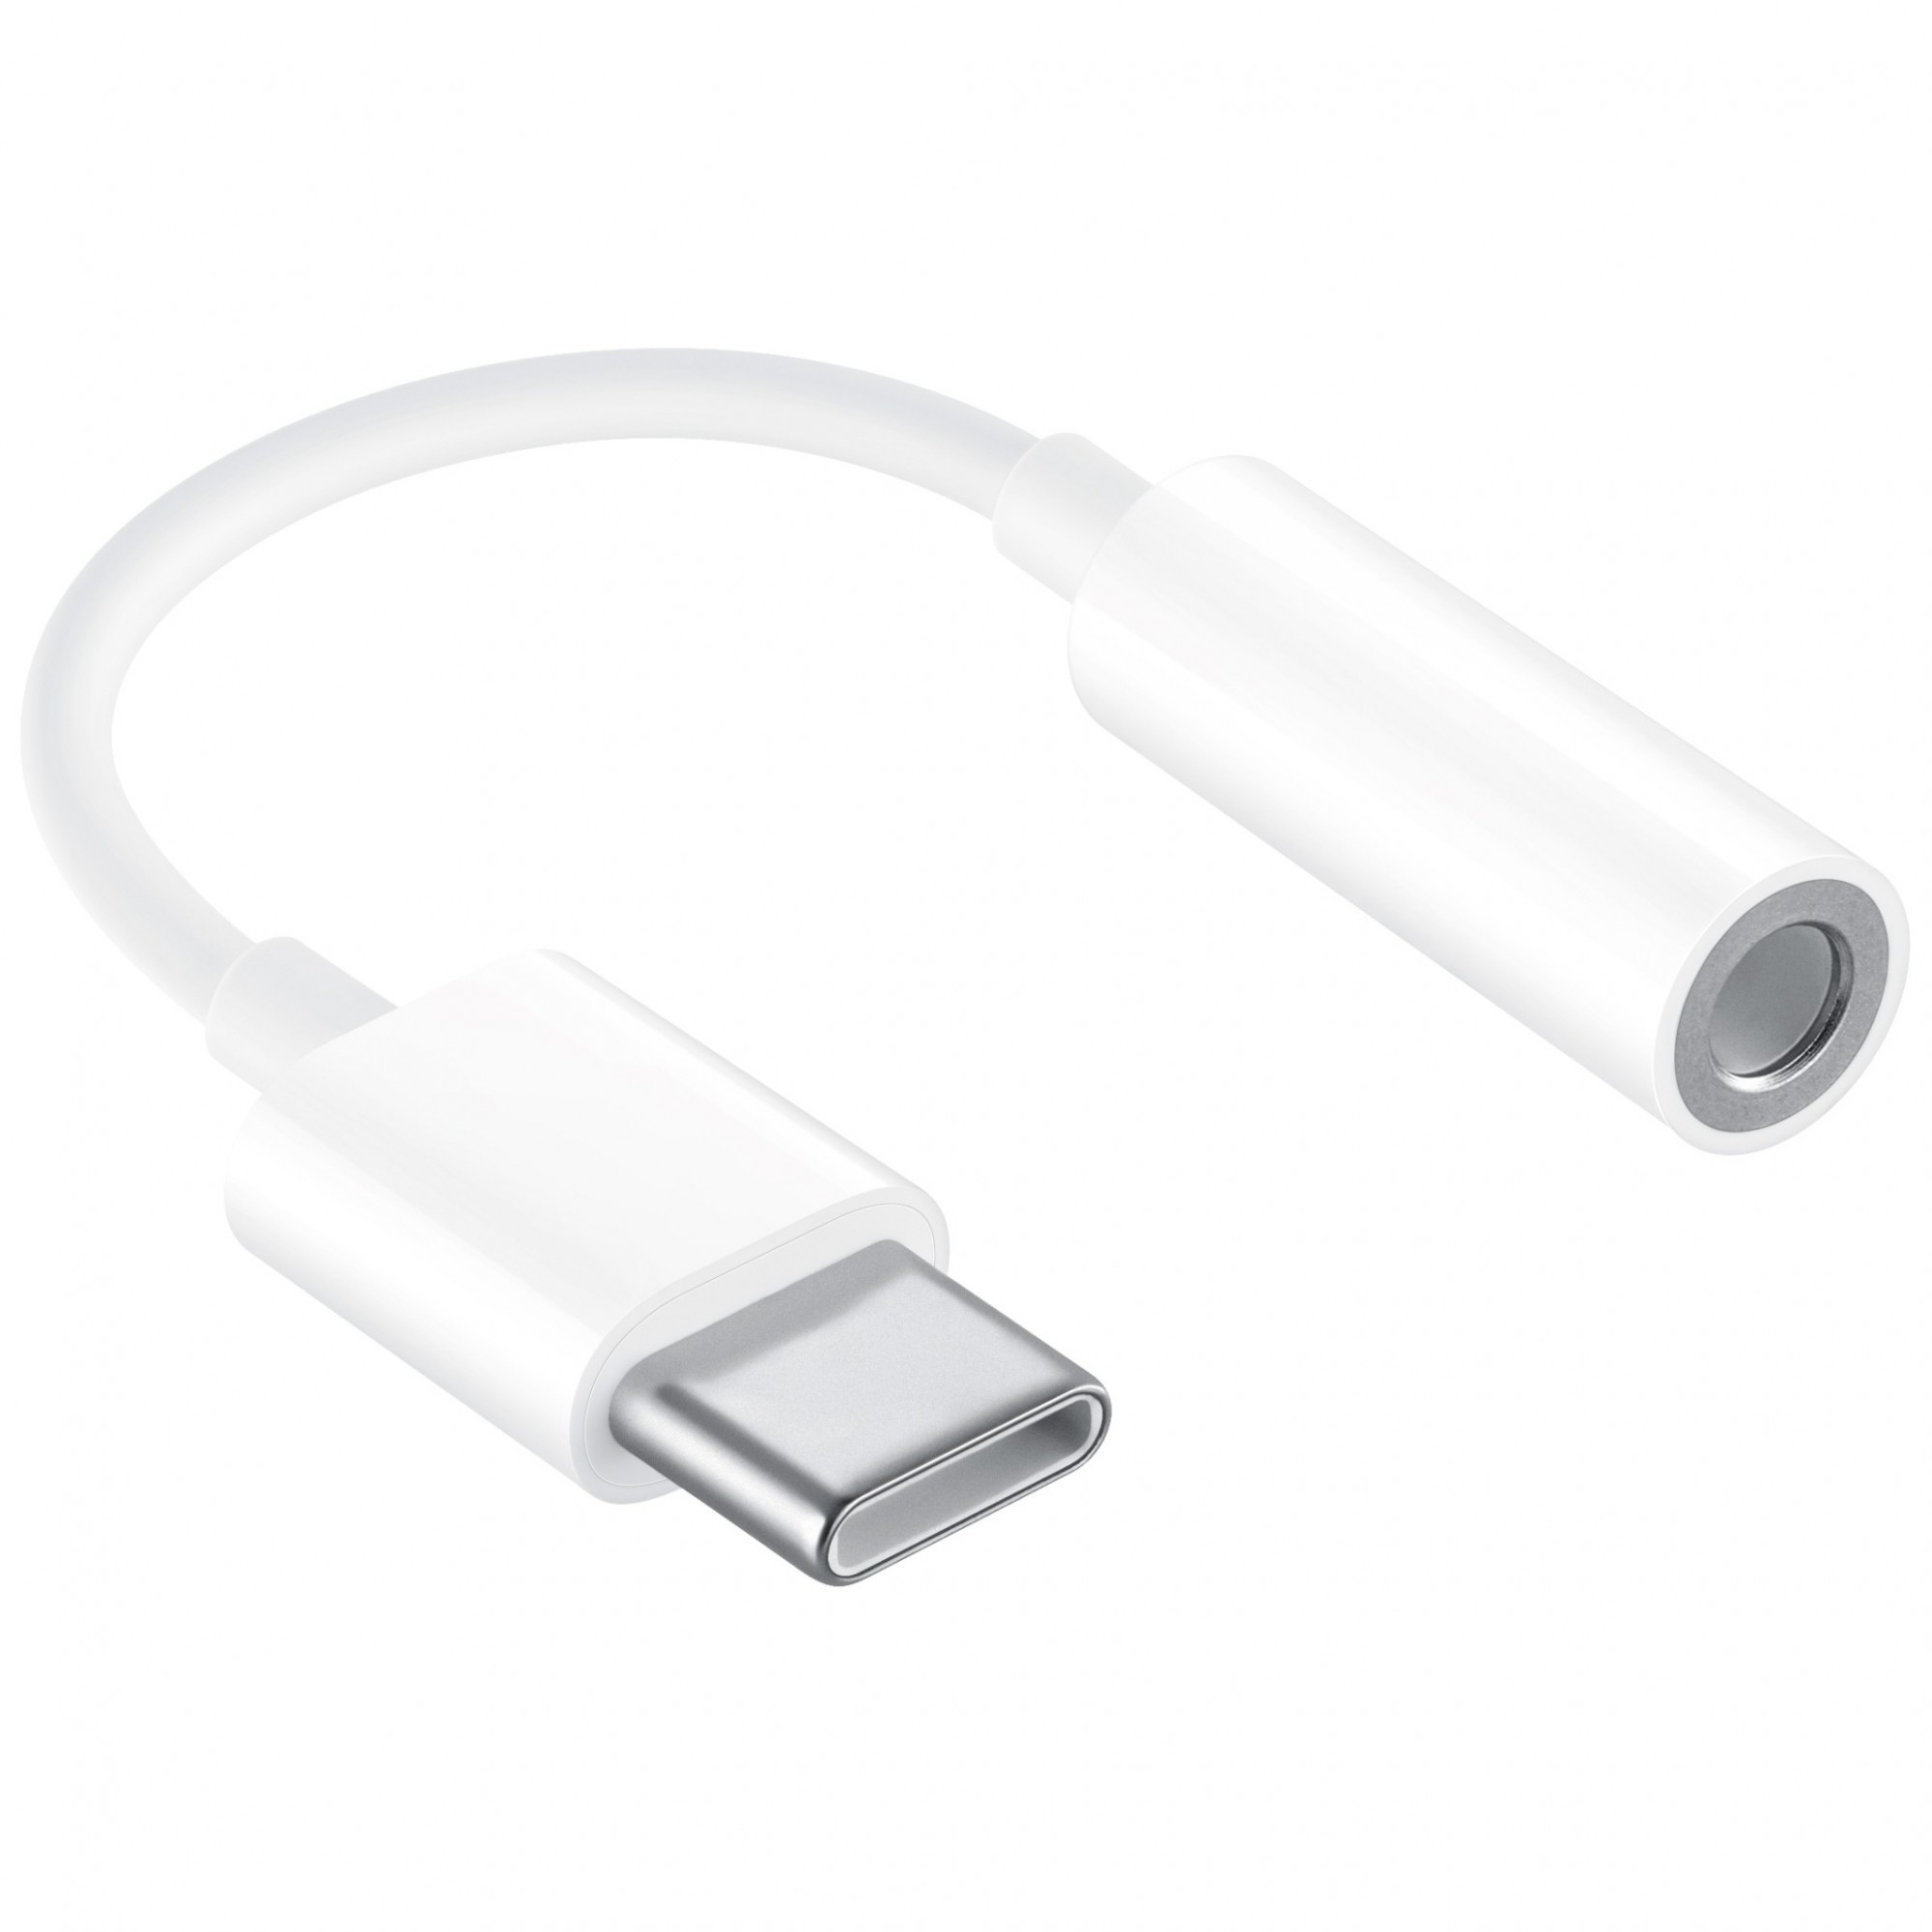 Apple USB-C to 3.5mm Cable | Talaco